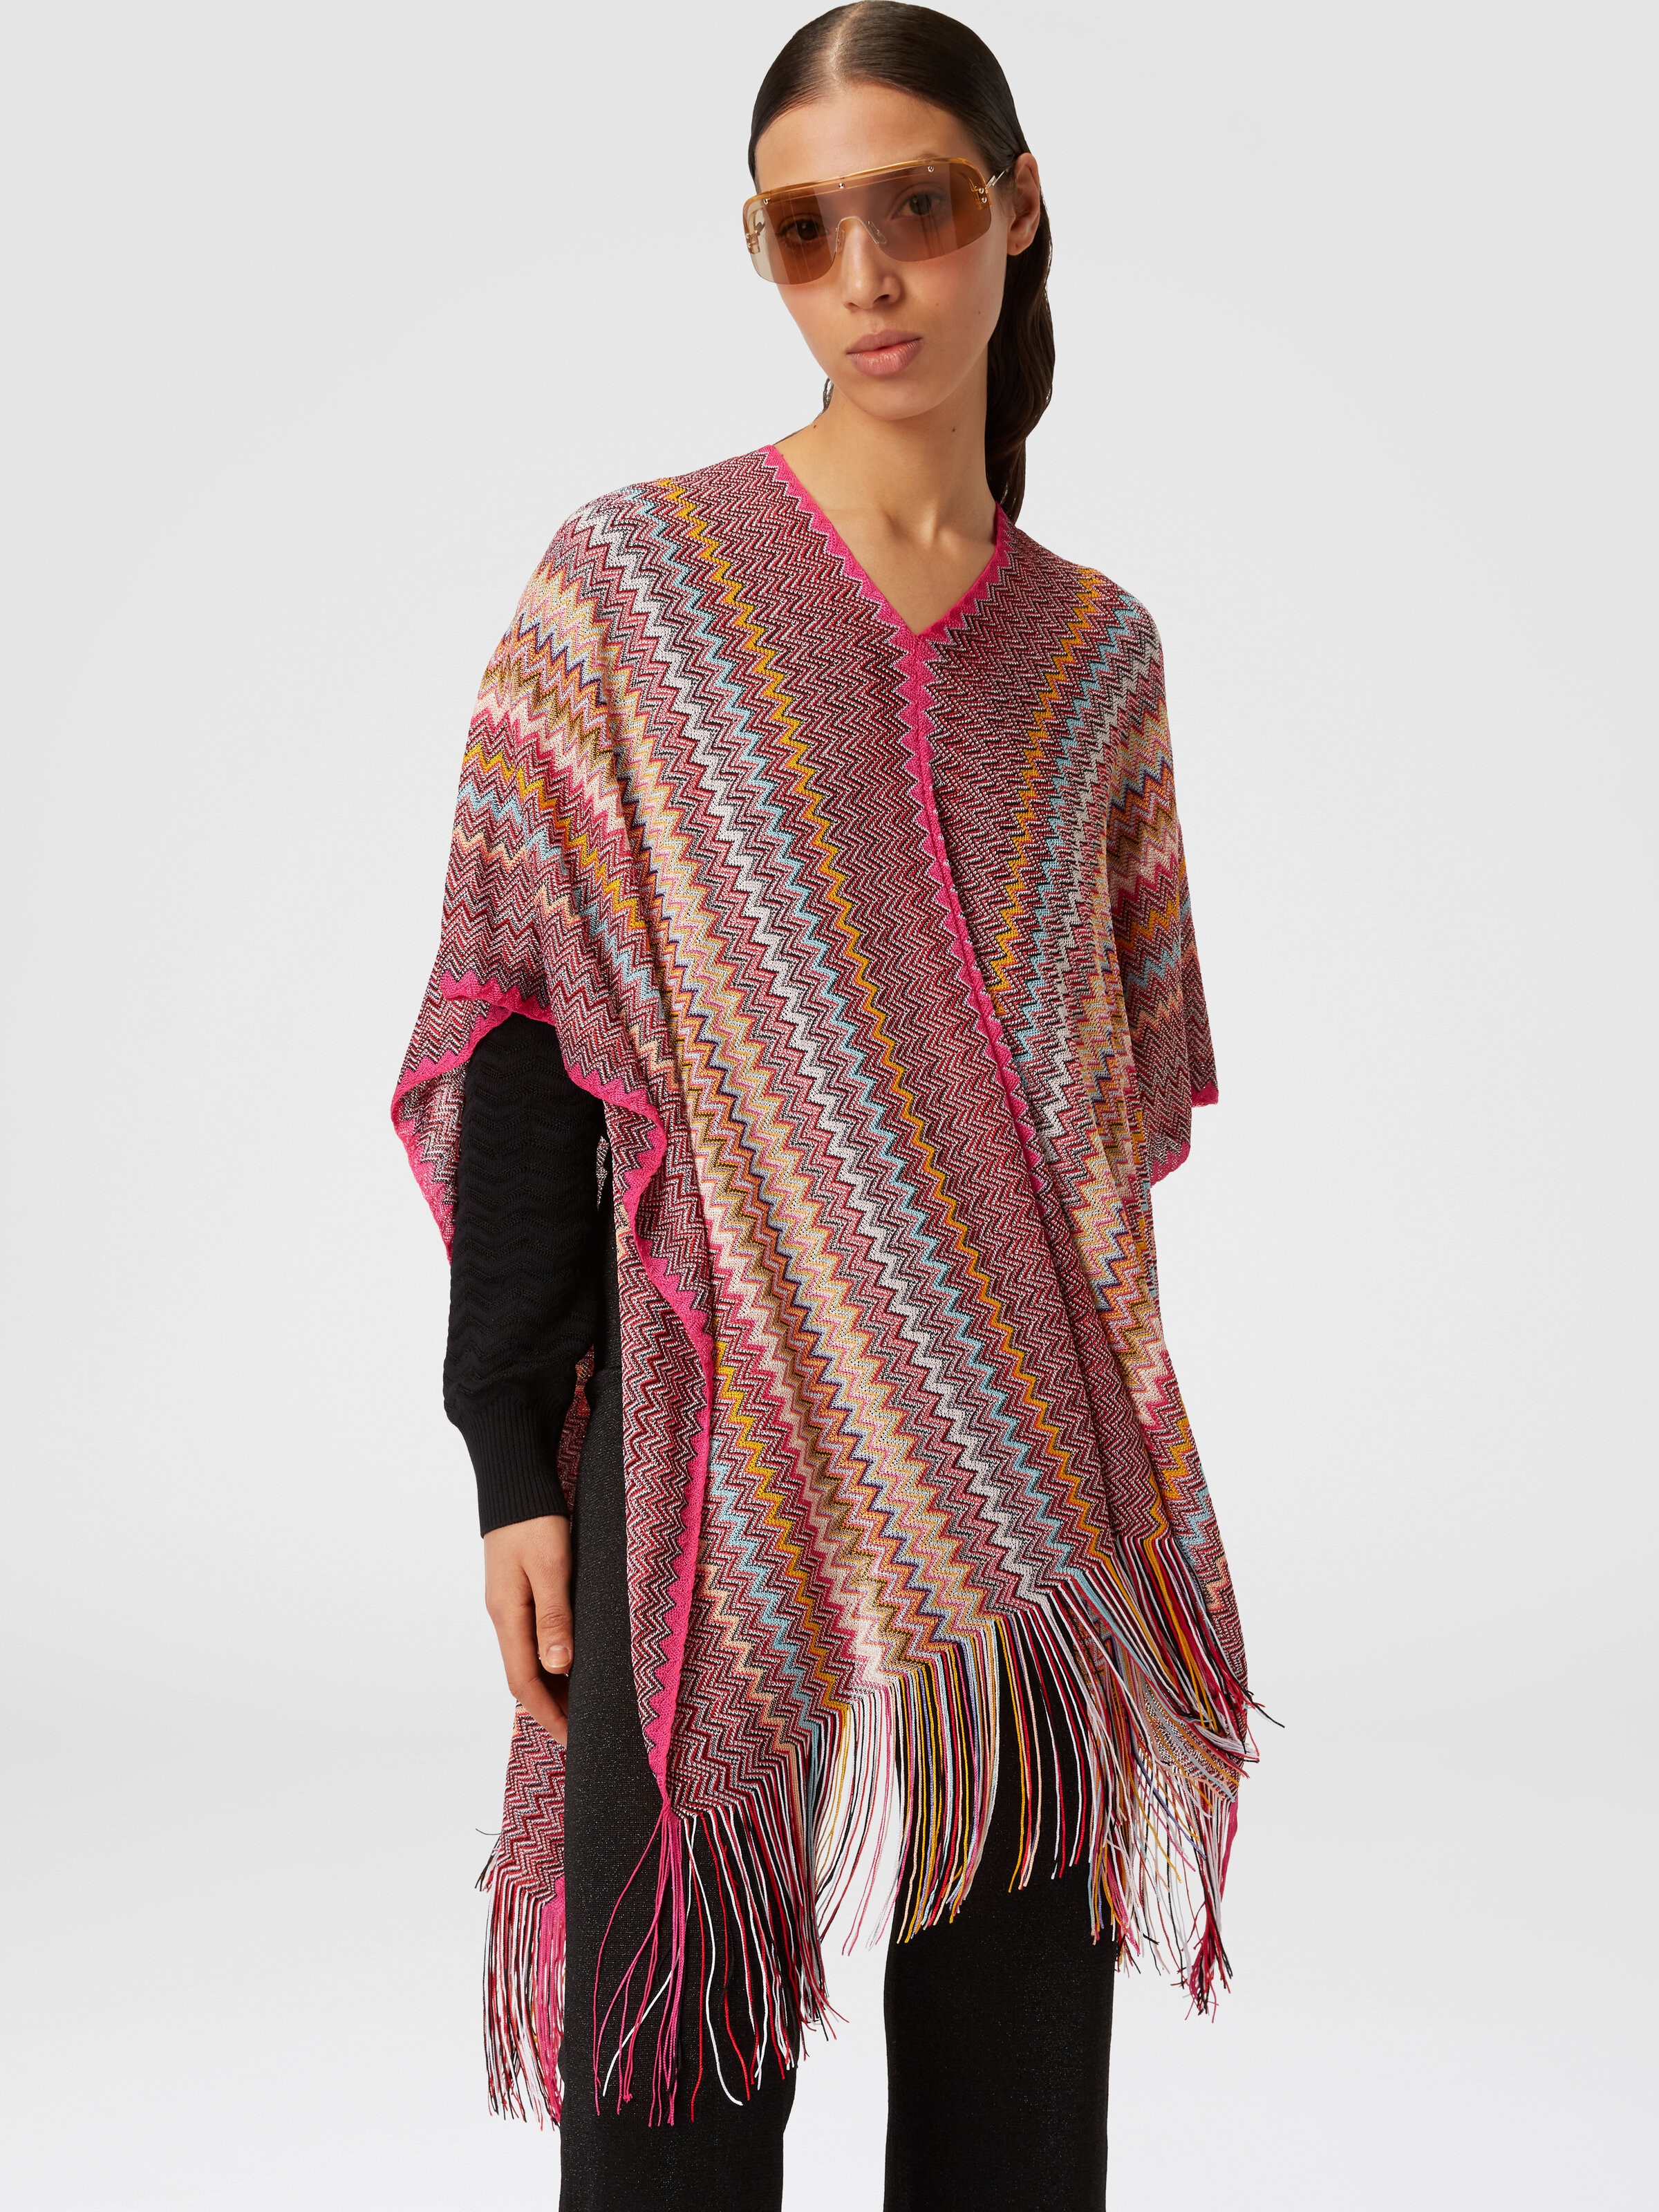 Poncho in zigzag viscose knit with fringes, Multicoloured  - 3